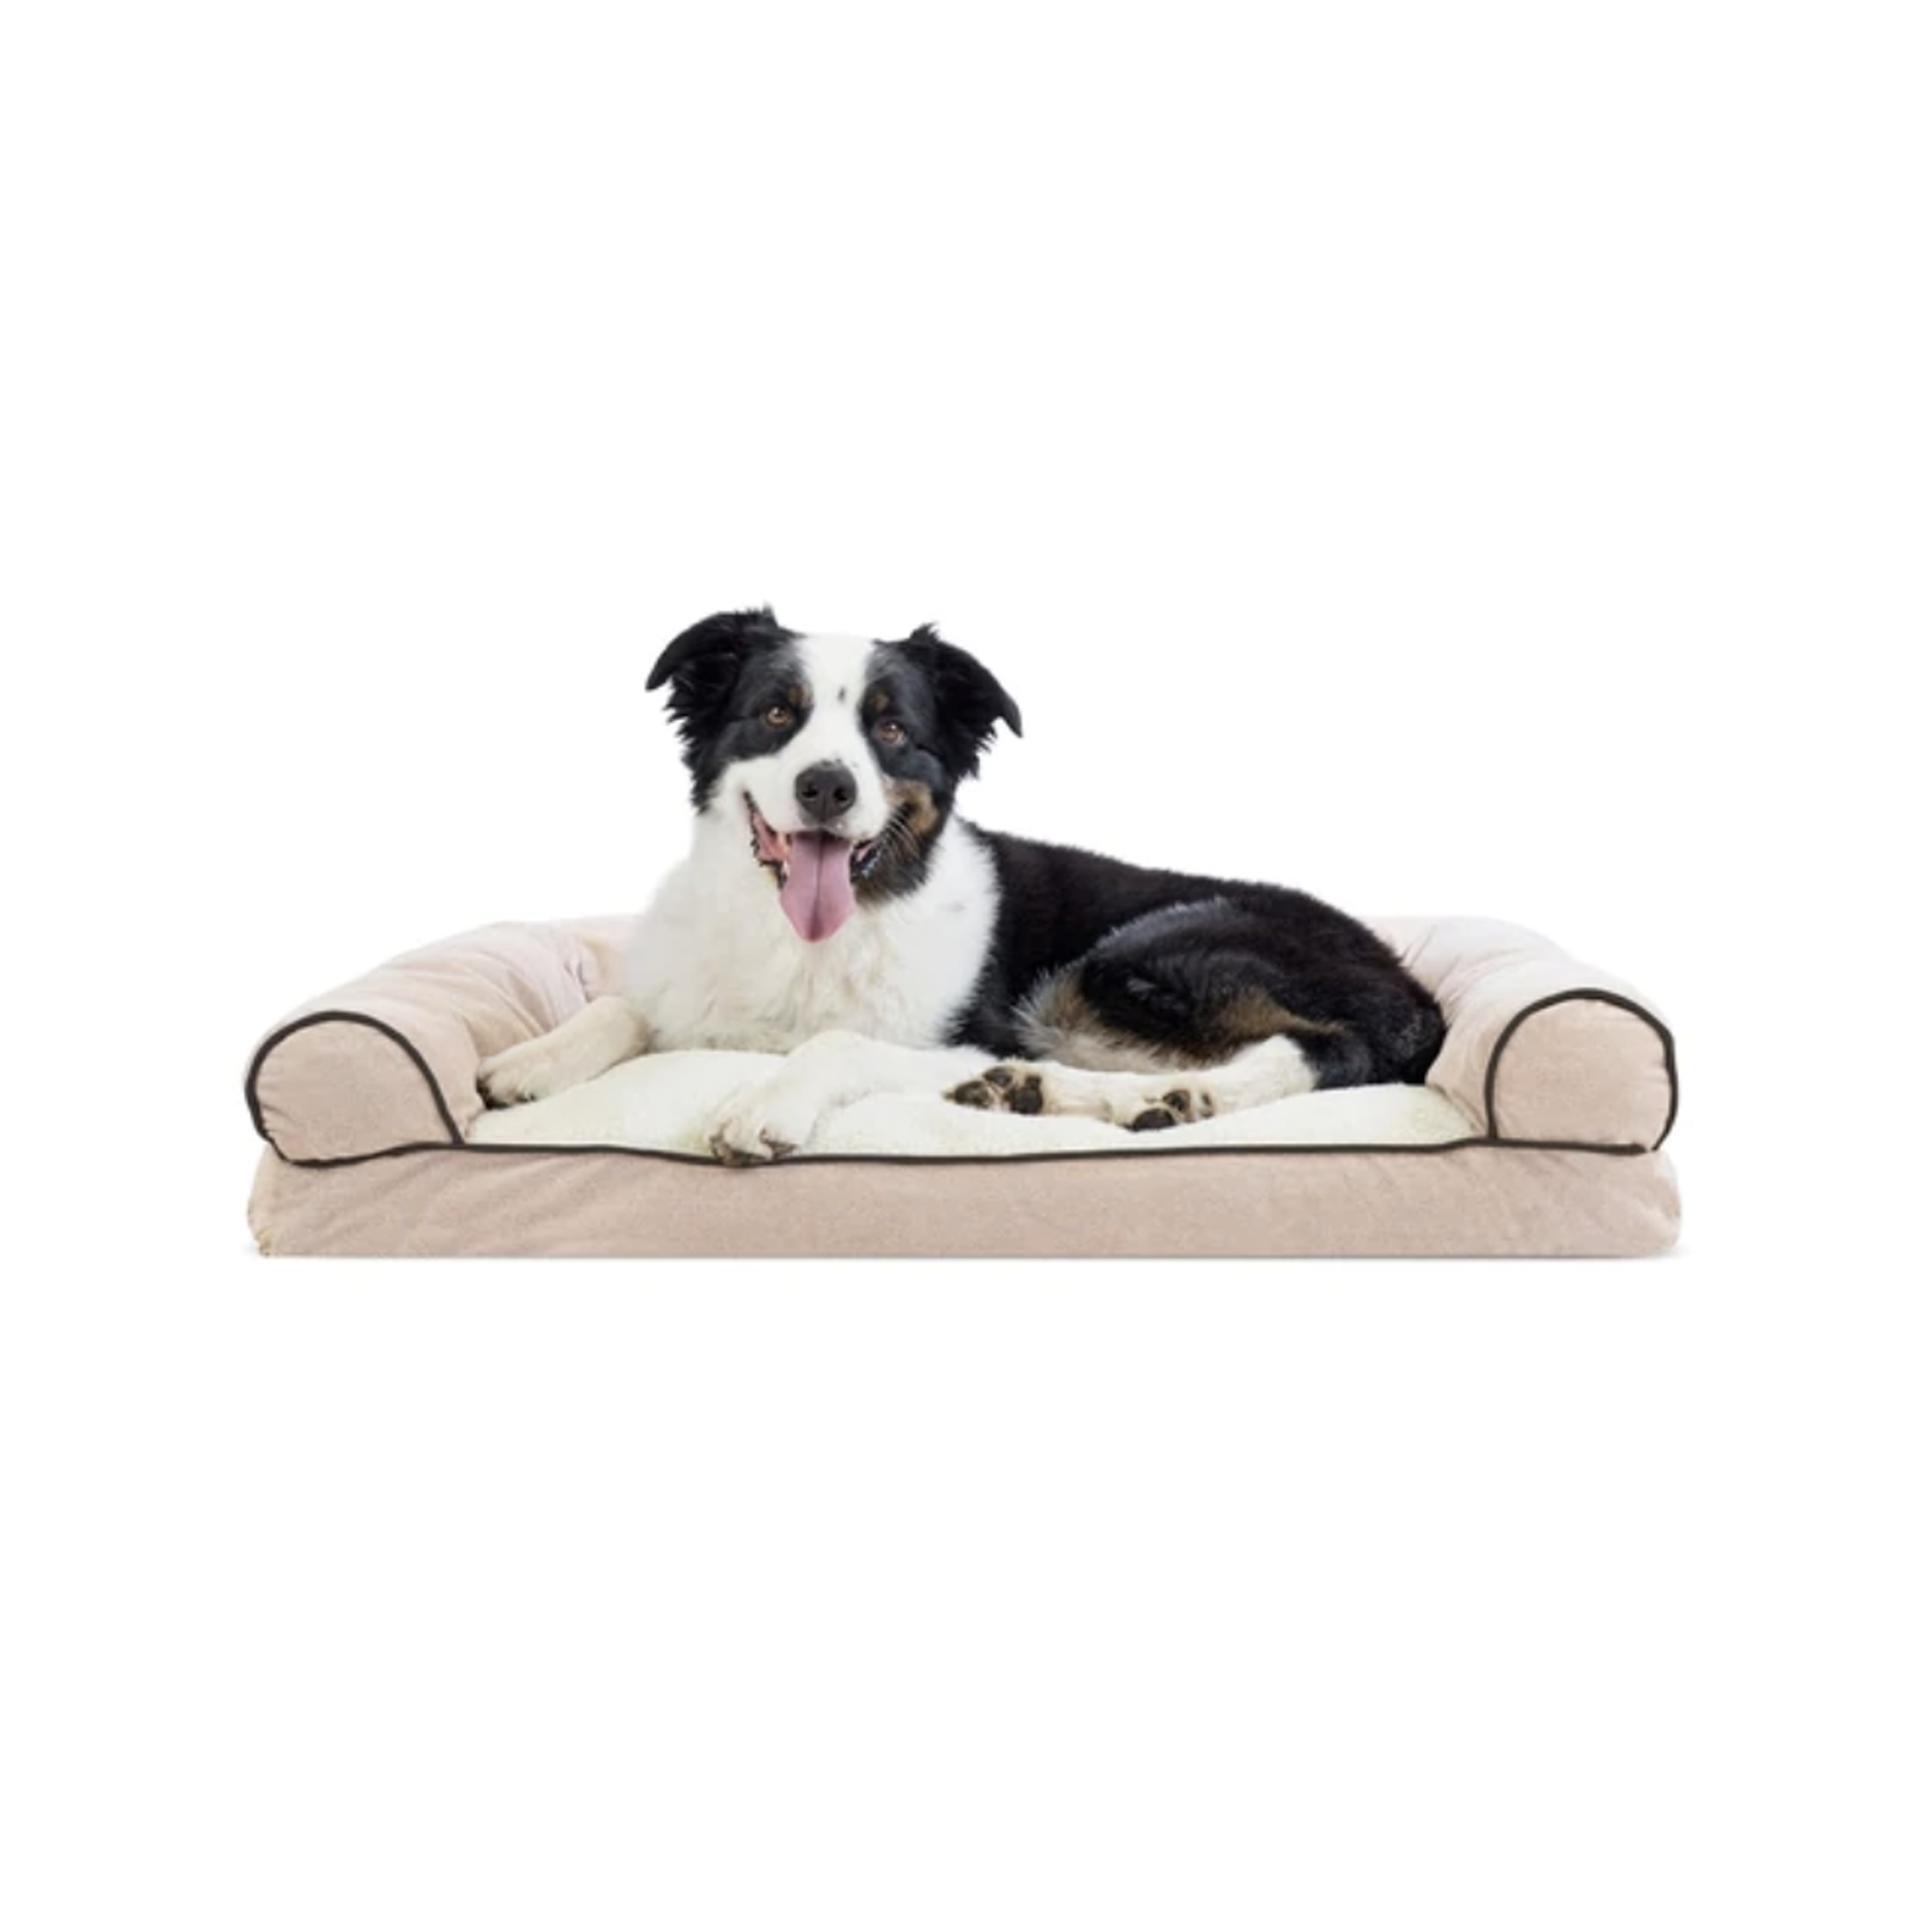 Overstock Black Friday Deals on The Dapple's List of Best Black Friday Deals for Dog Lovers and Dog Owners